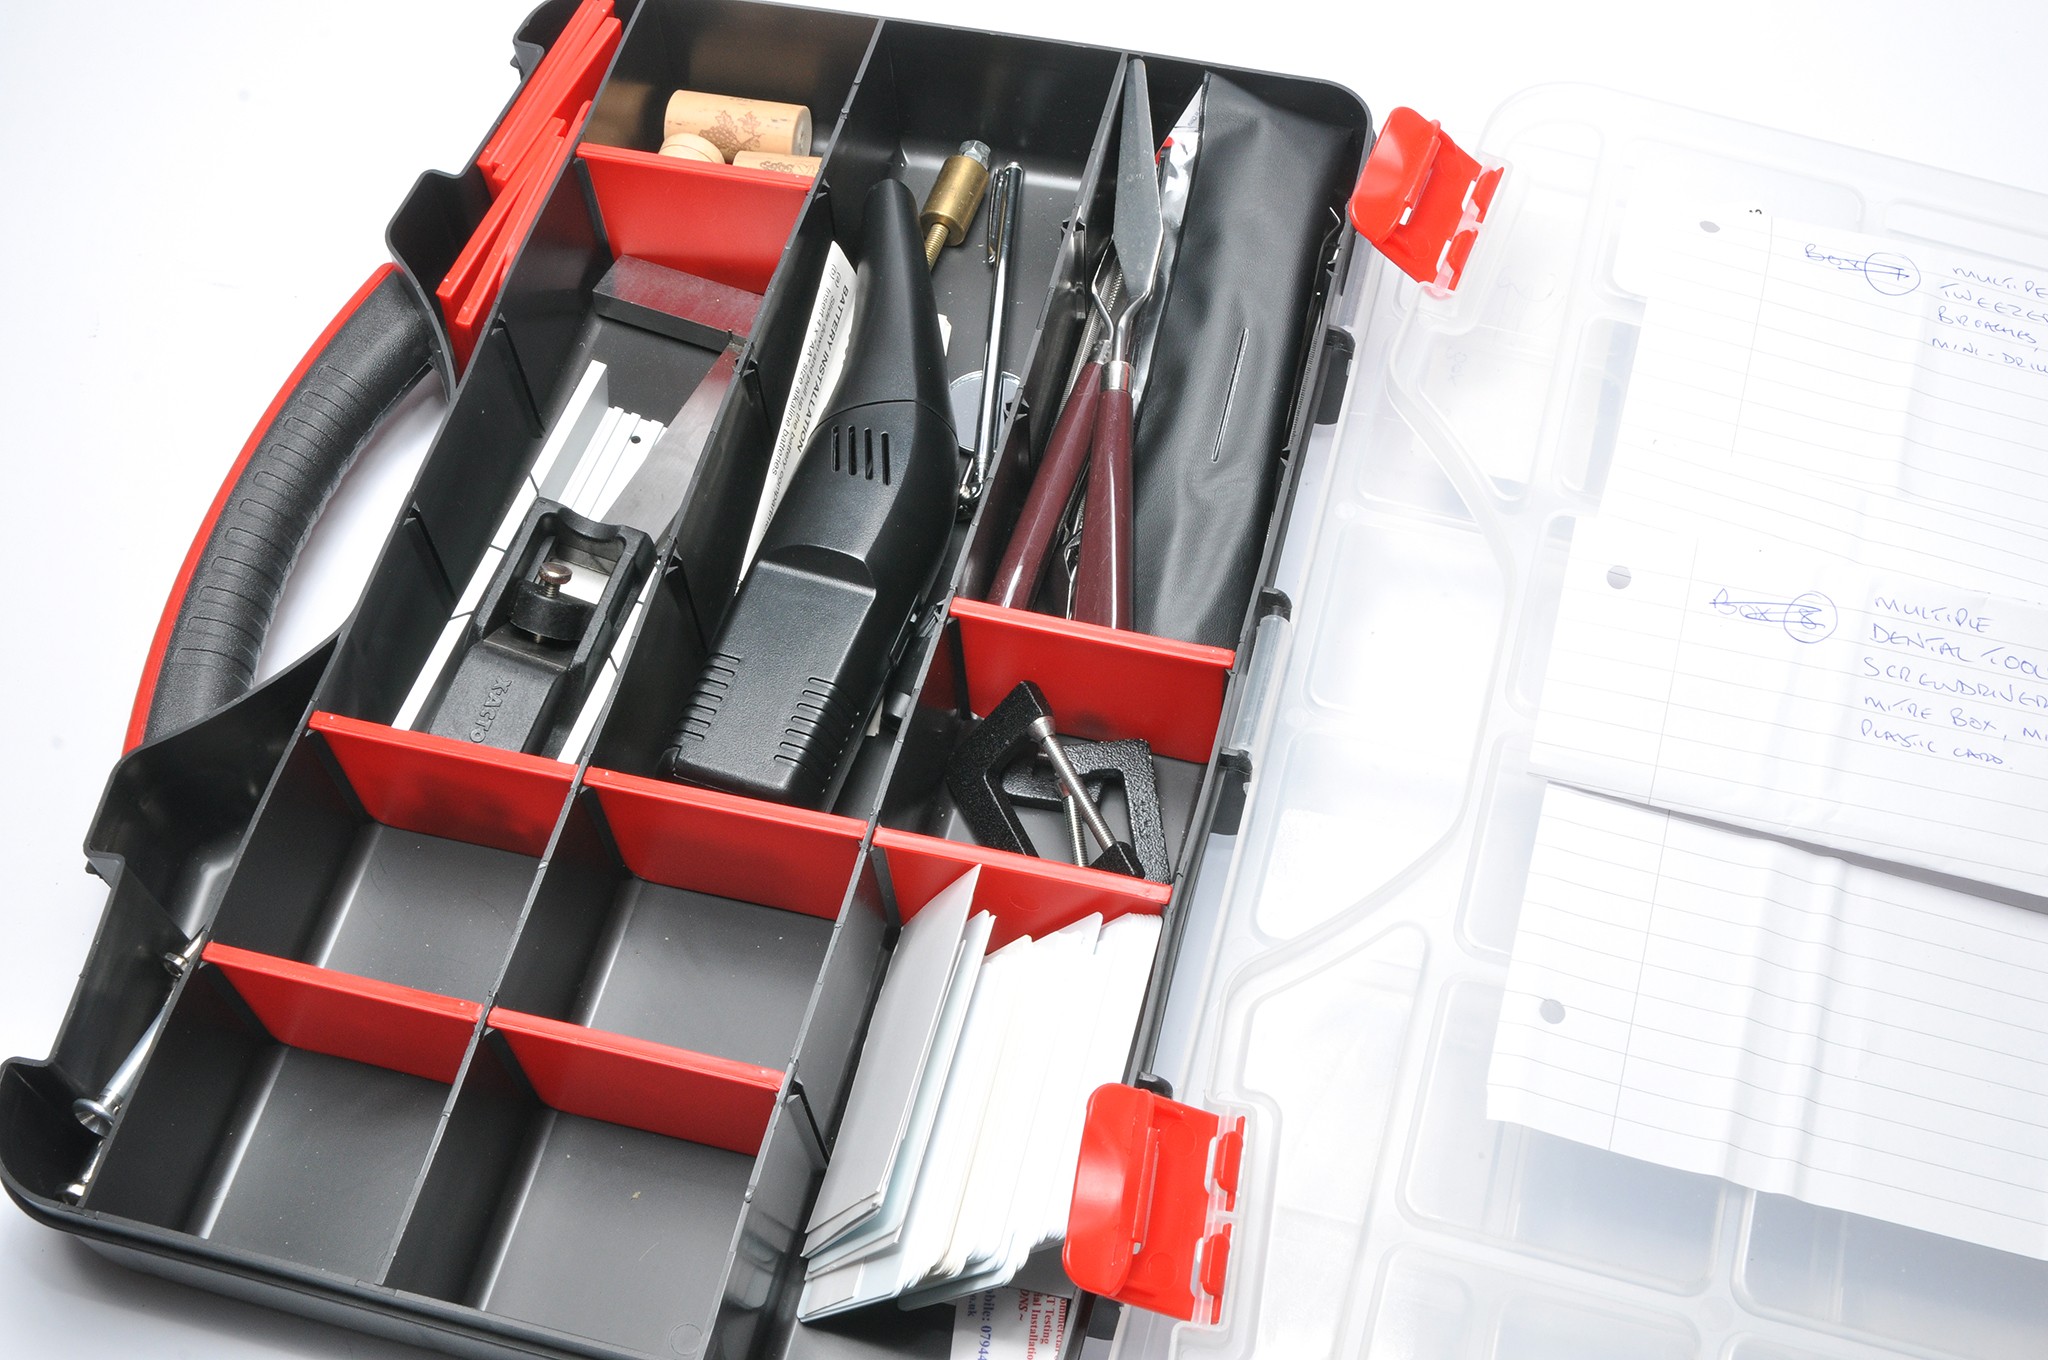 Modelling Tools and Accessories as shown, contained in two cases. - Image 3 of 3